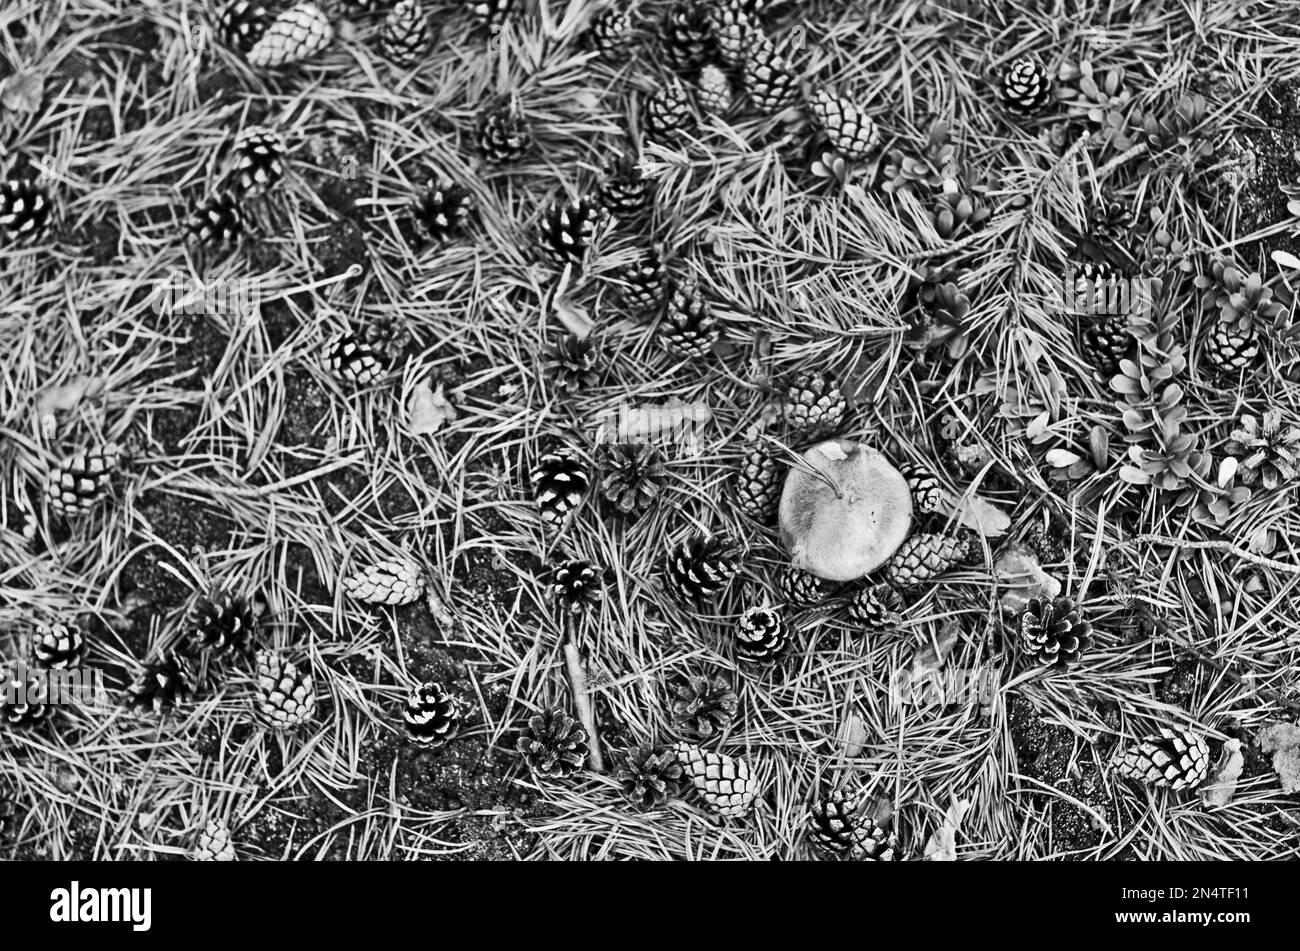 Black and white picture of a mushroom hat among fir branches and needles on the forest floor in the tundra. Stock Photo